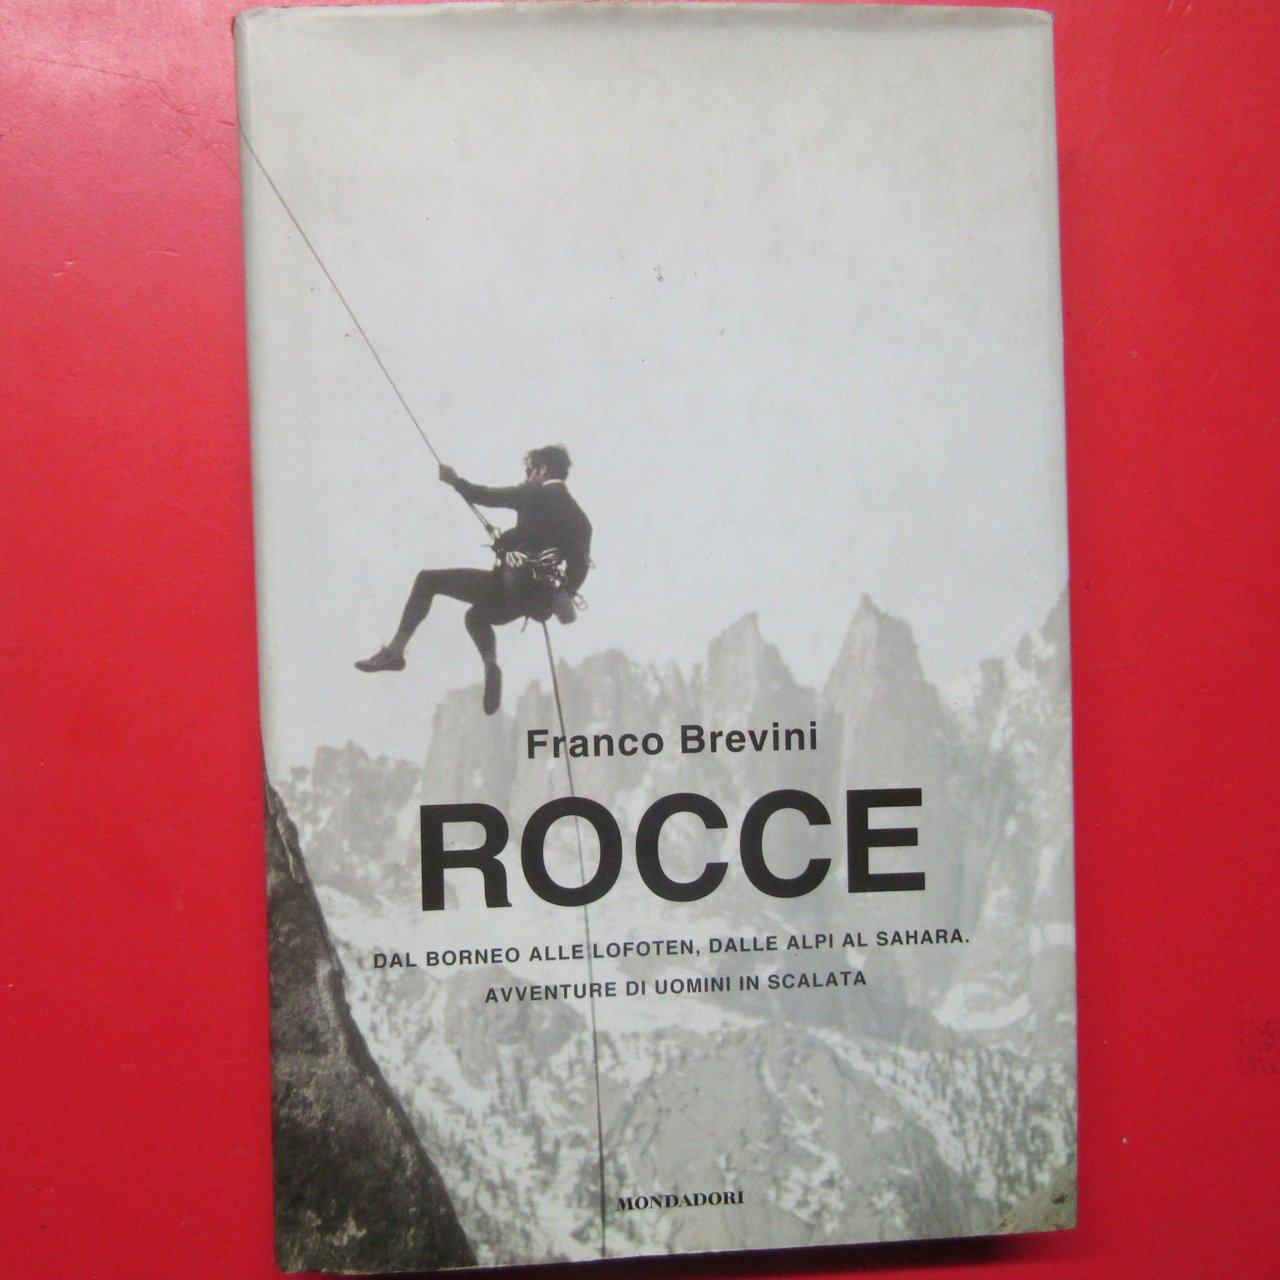 Rocce